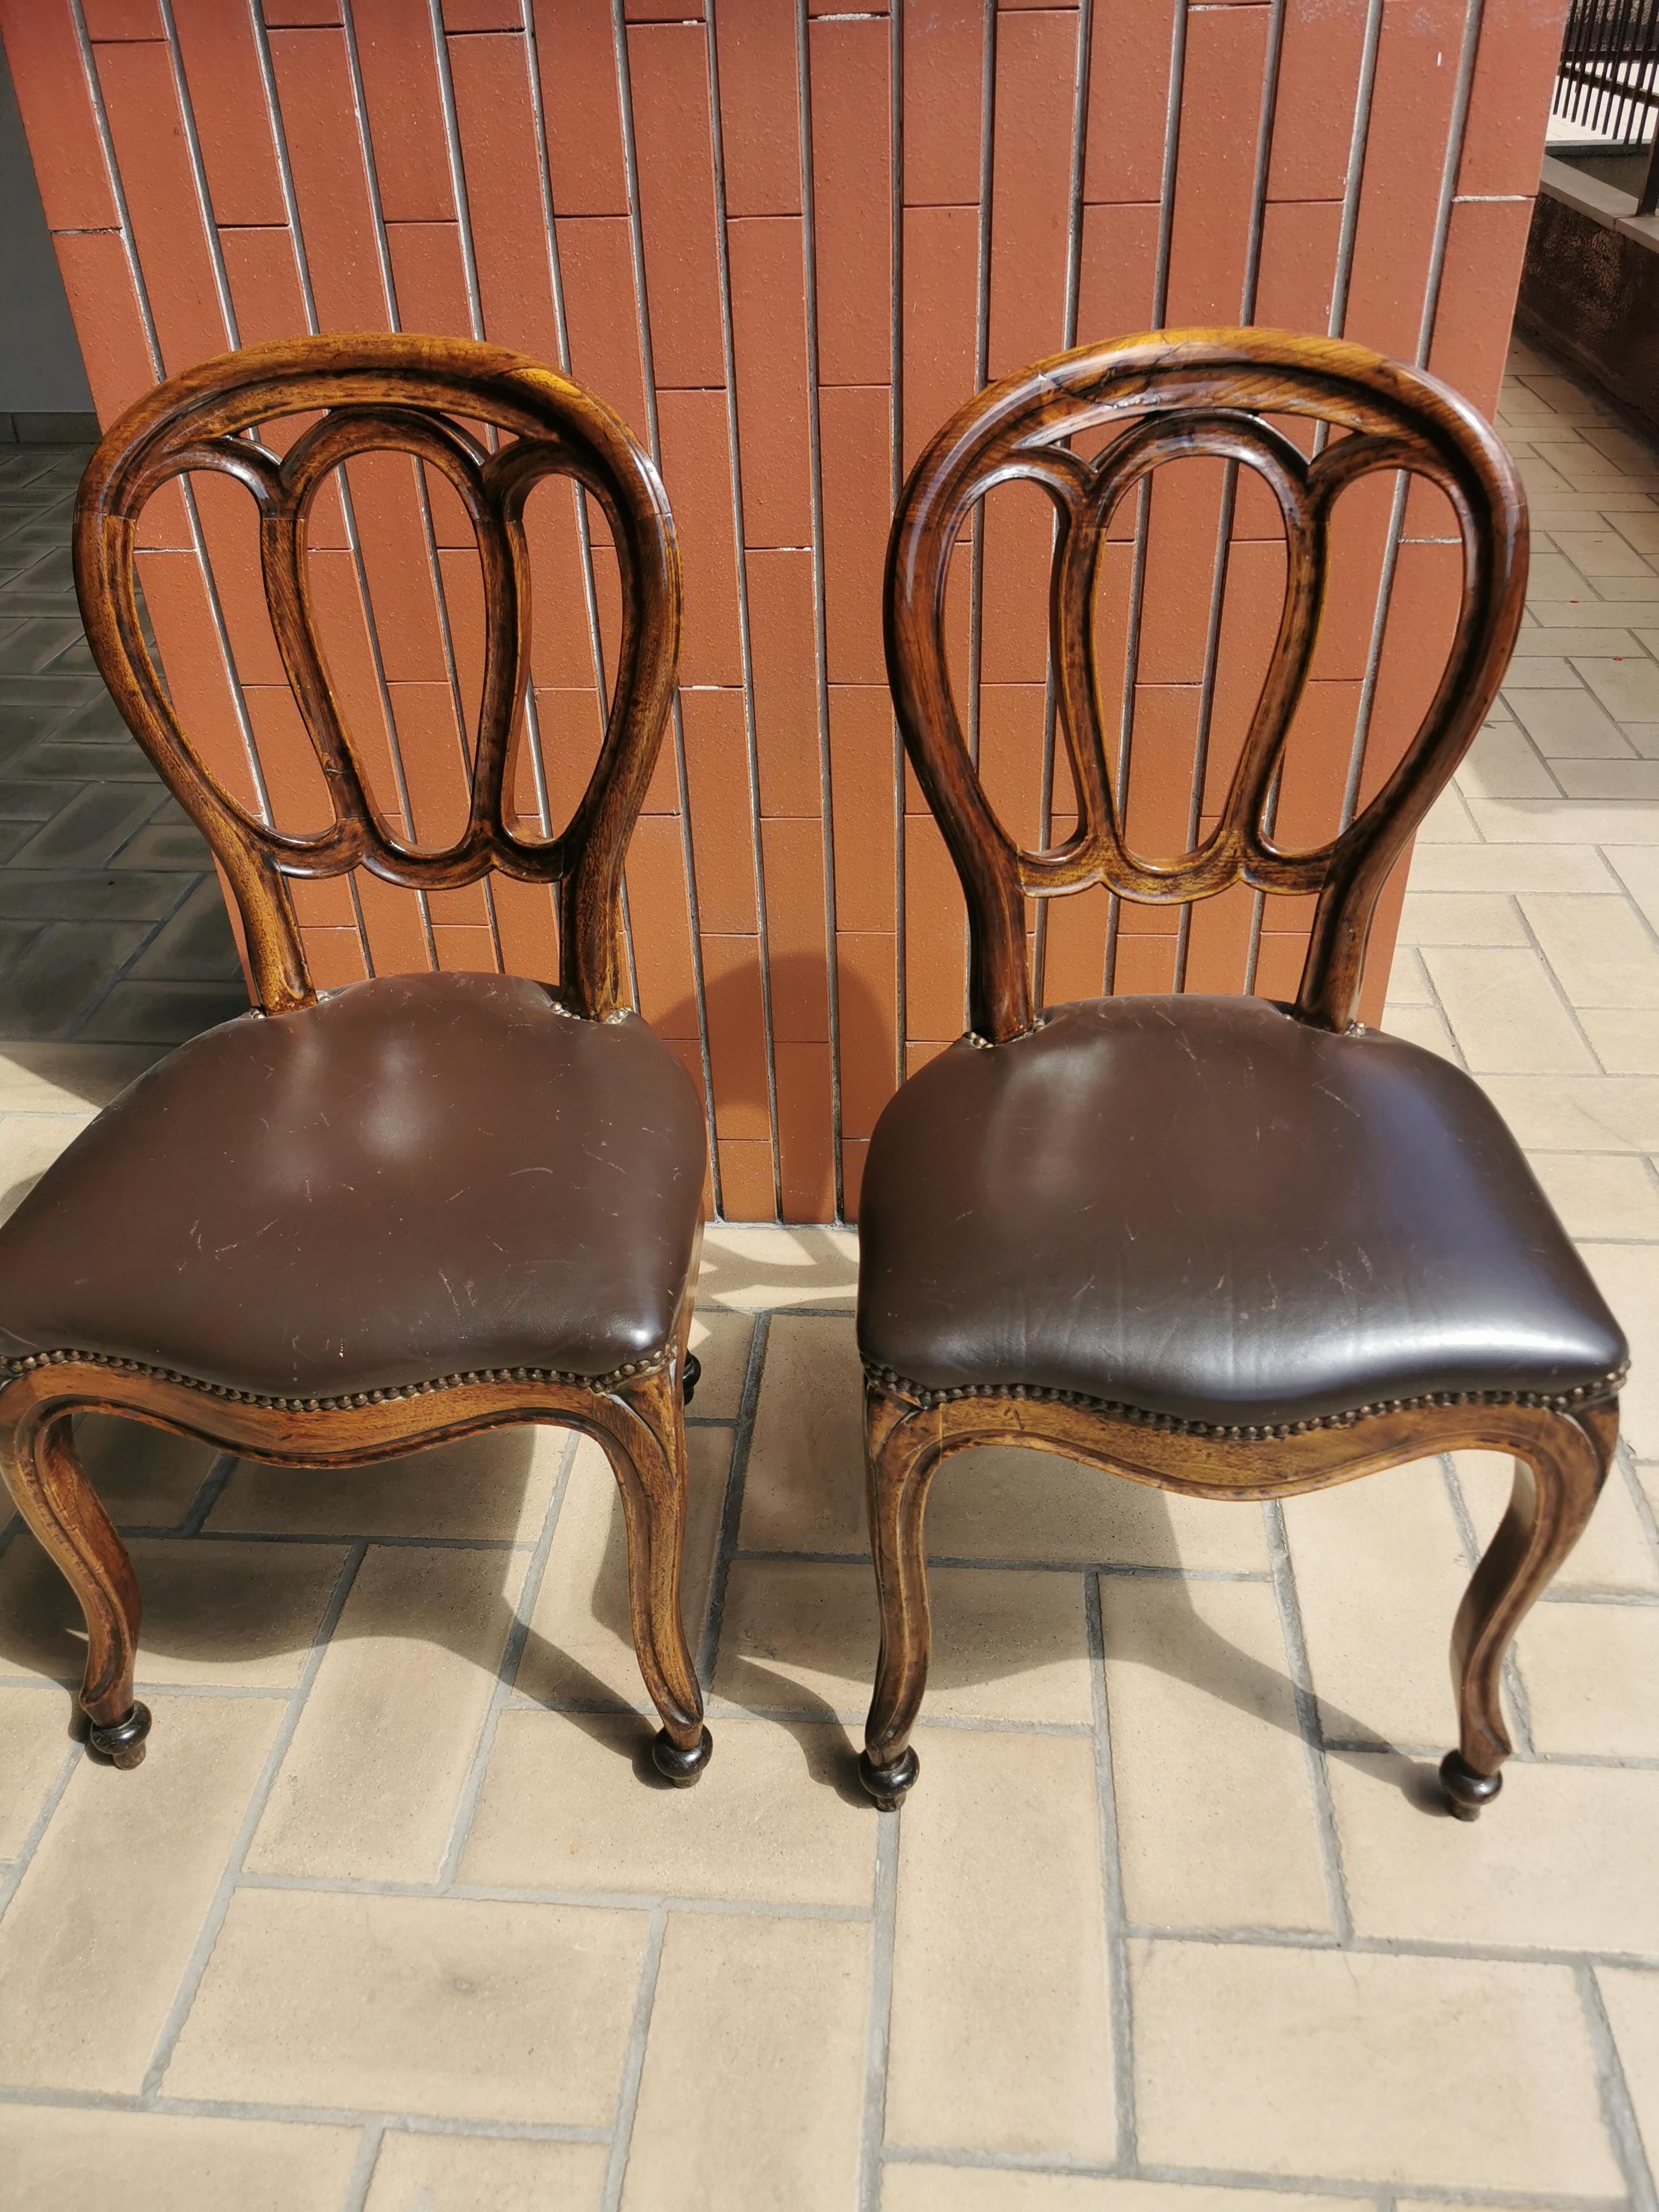 Pair of 19th century side chairs, walnut, leather, circa 1860 Italy
wood structure is in very good condition, 
leather part is also in good condition just needs some creams to clean. 
quality items, carved walnut and very elegant shape and